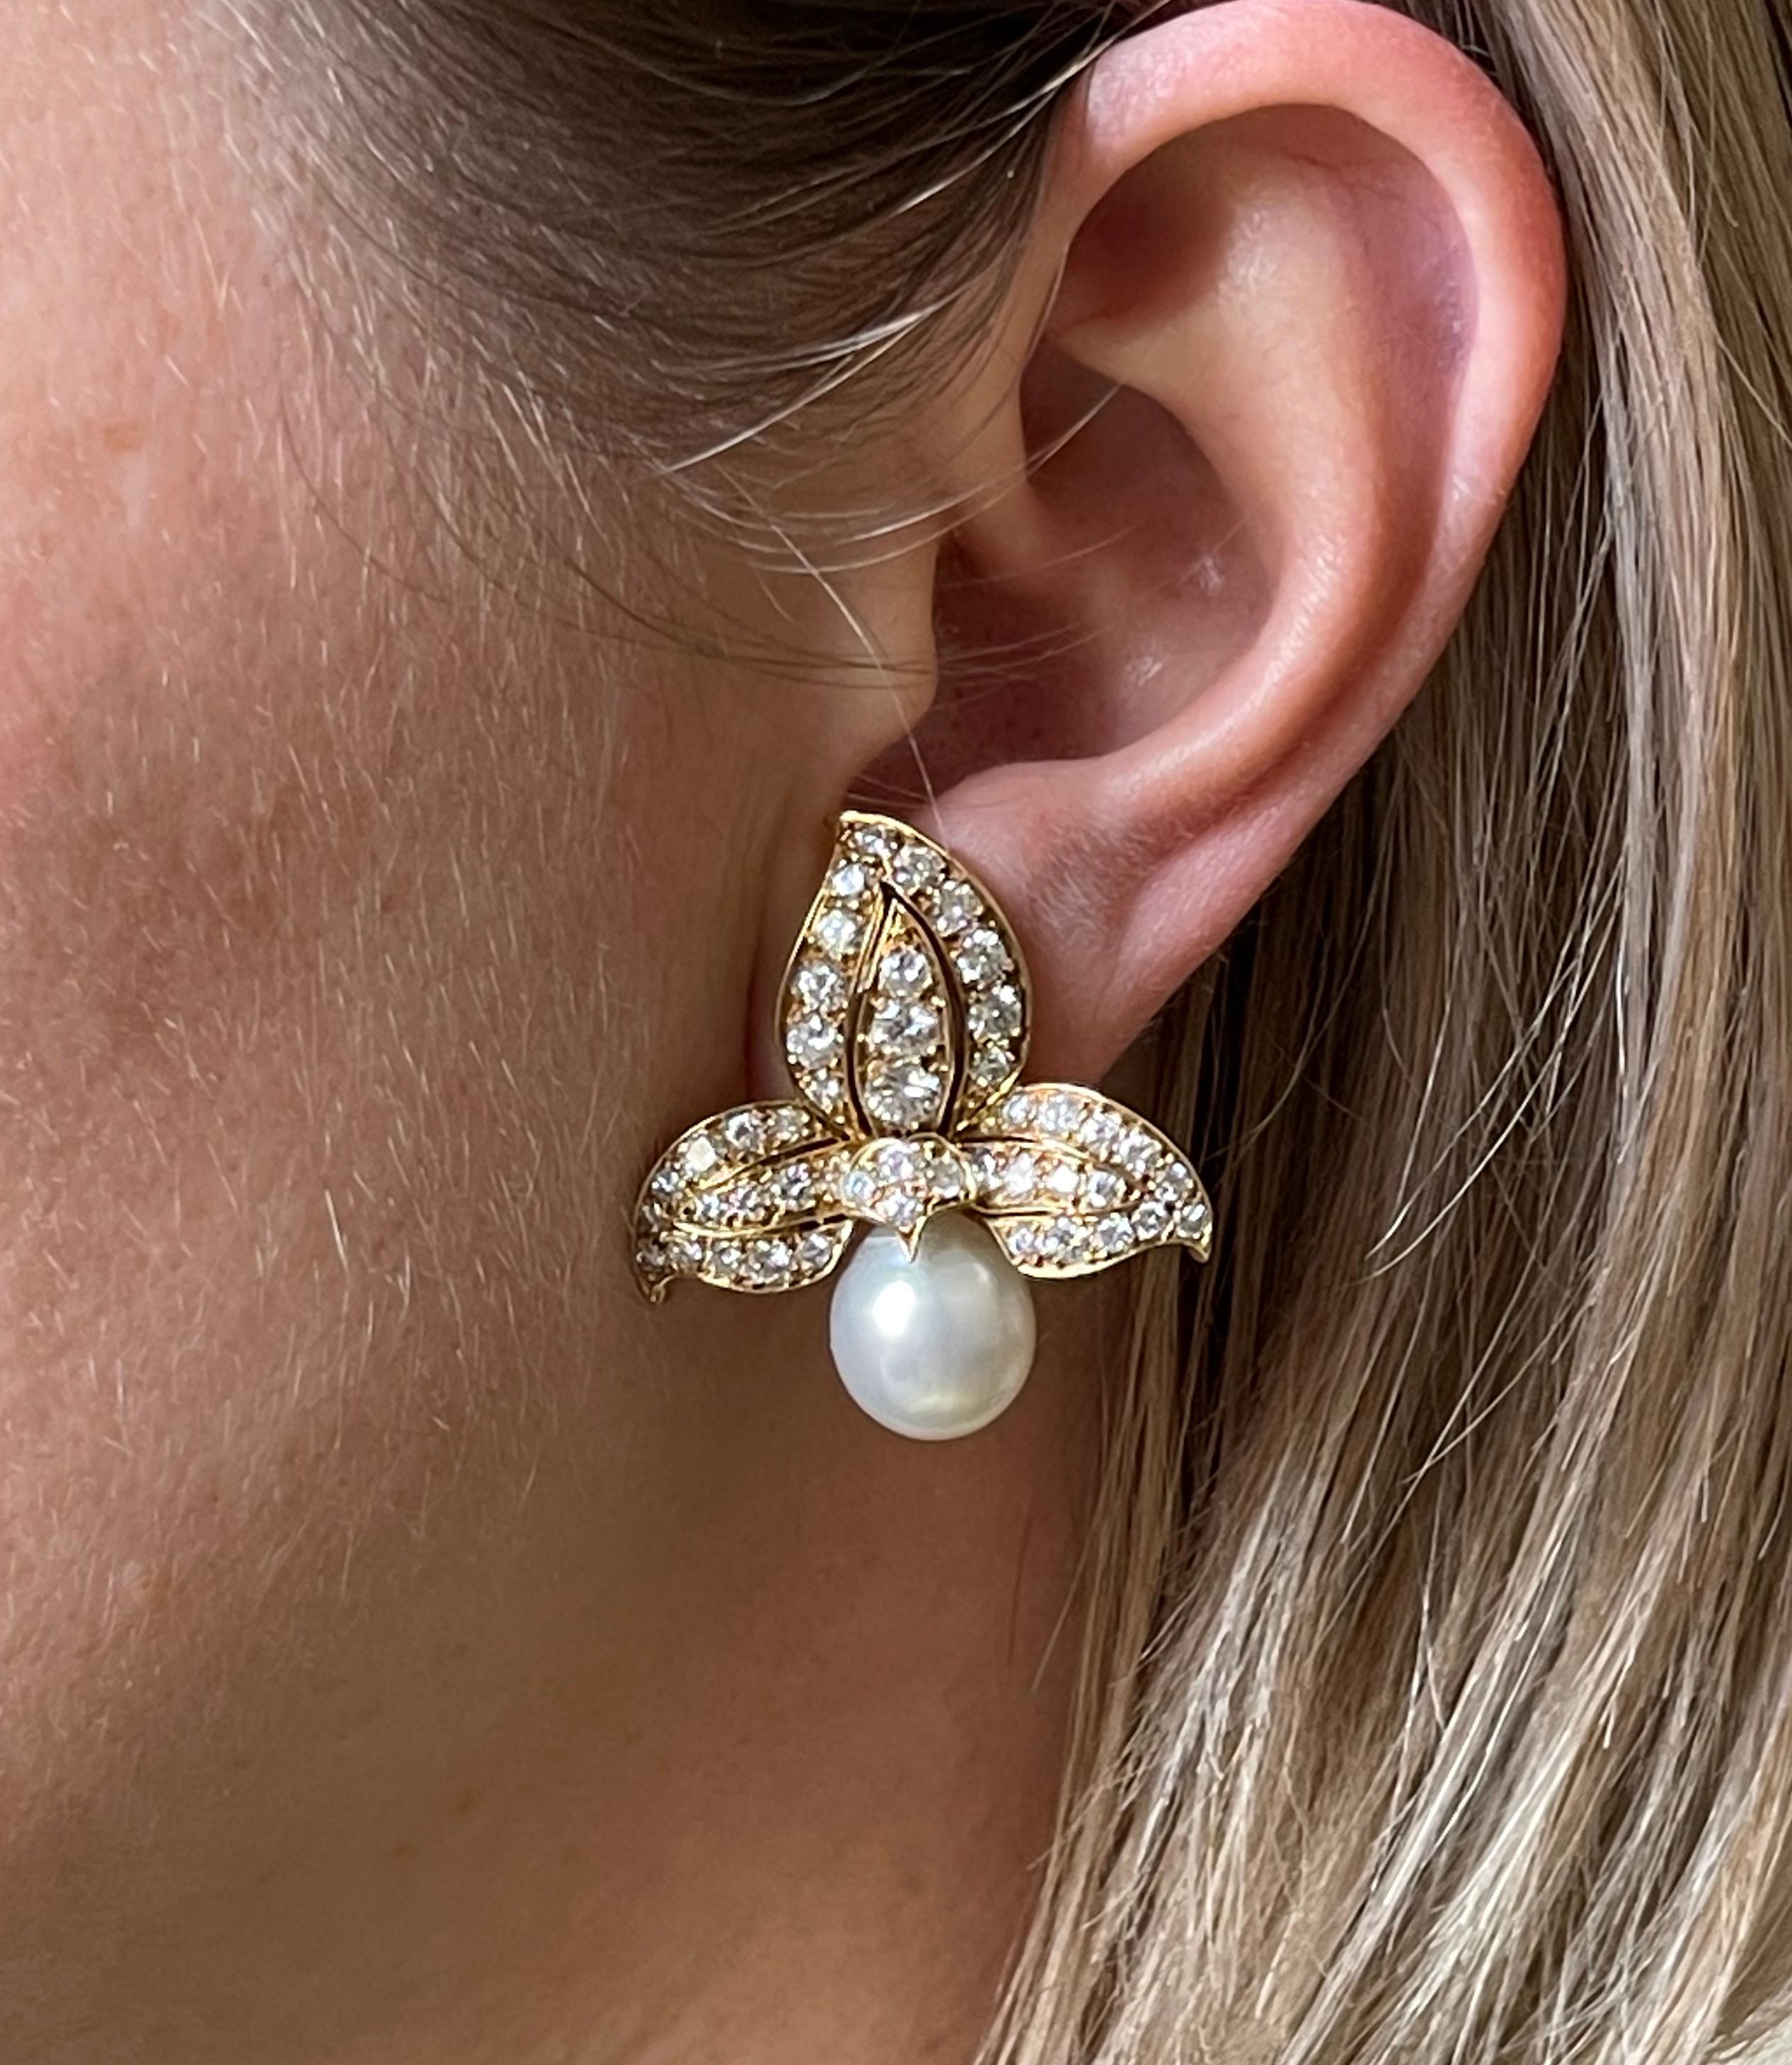 Pair of exquisite Rene Boivin 18k gold cocktail earrings, set with 11mm x 12.5mm South Sea pearls, and approx. 4.40ctw F/VVS diamonds. Earrings measure 1 5/16